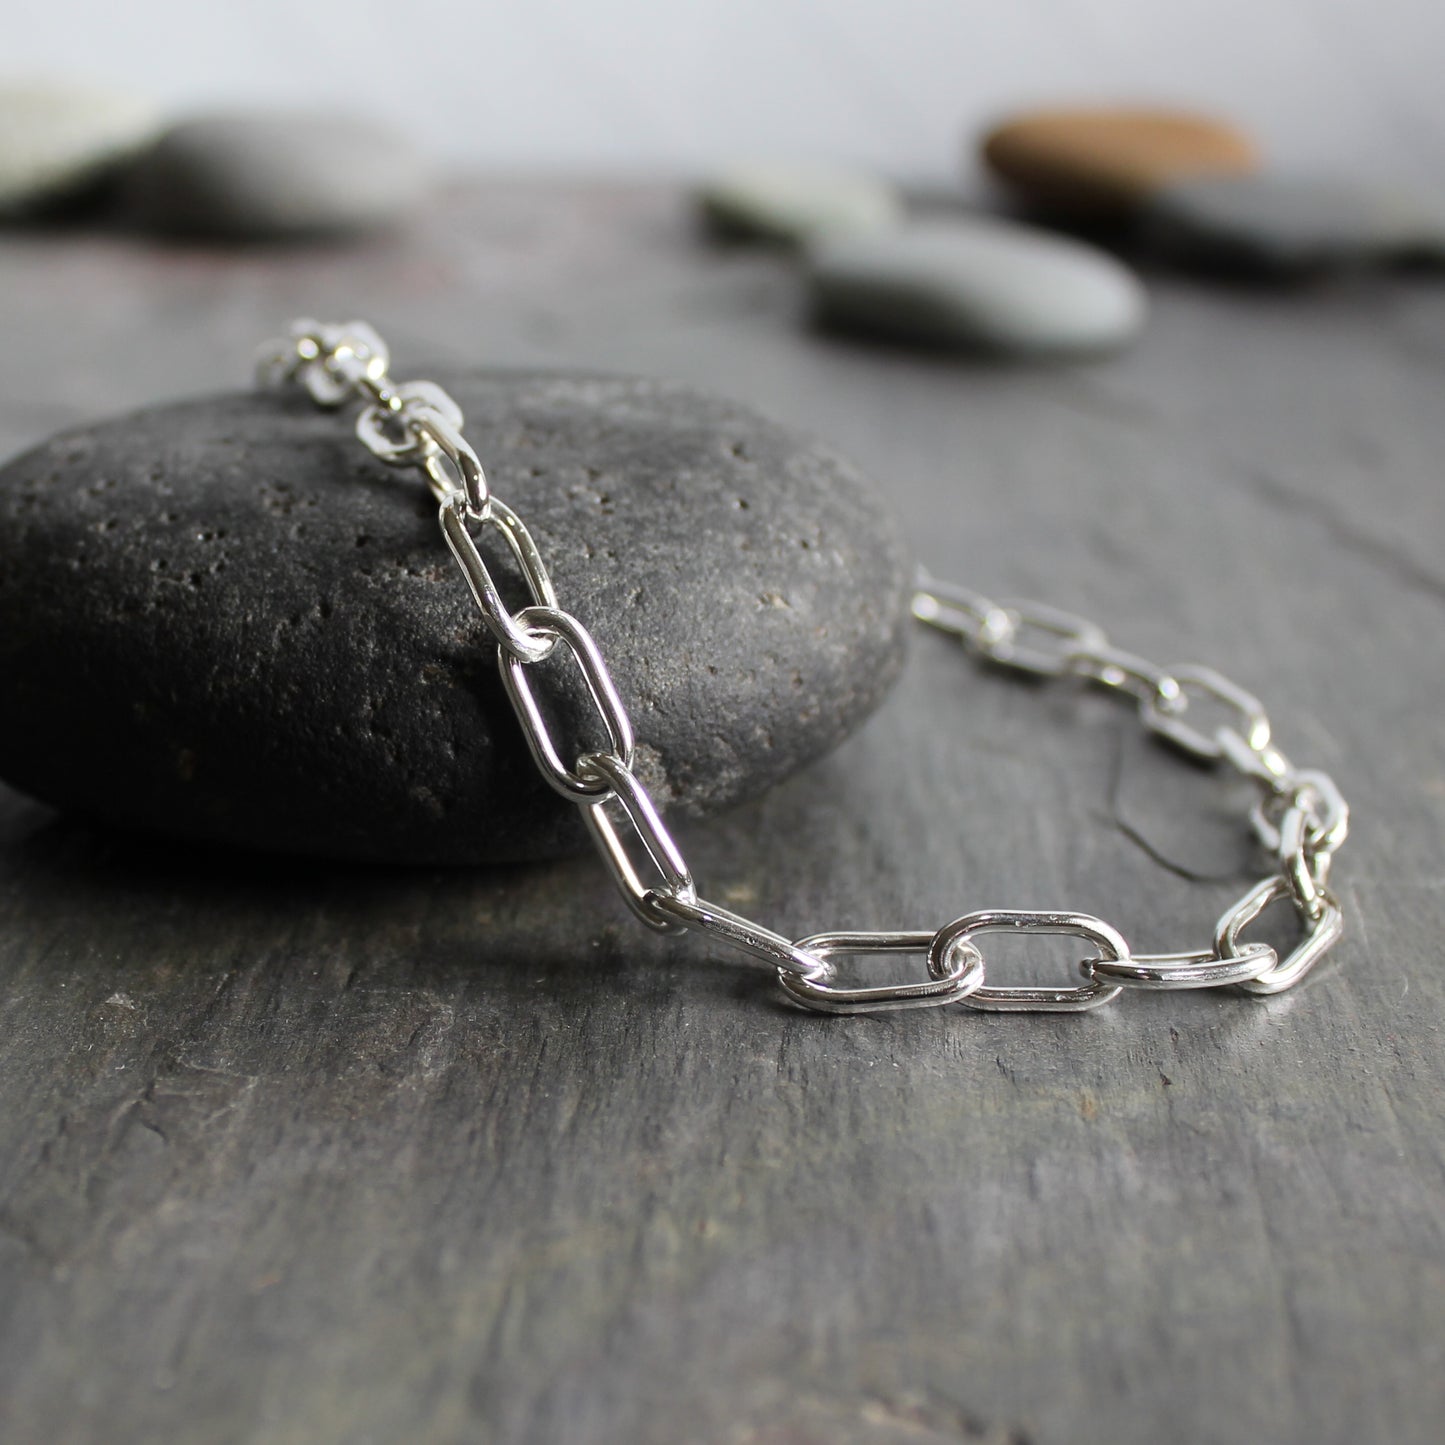 This is a handmade chain made with 14 gauge sterling silver wire. Each link is individually linked, soldered, and shaped by hand. 